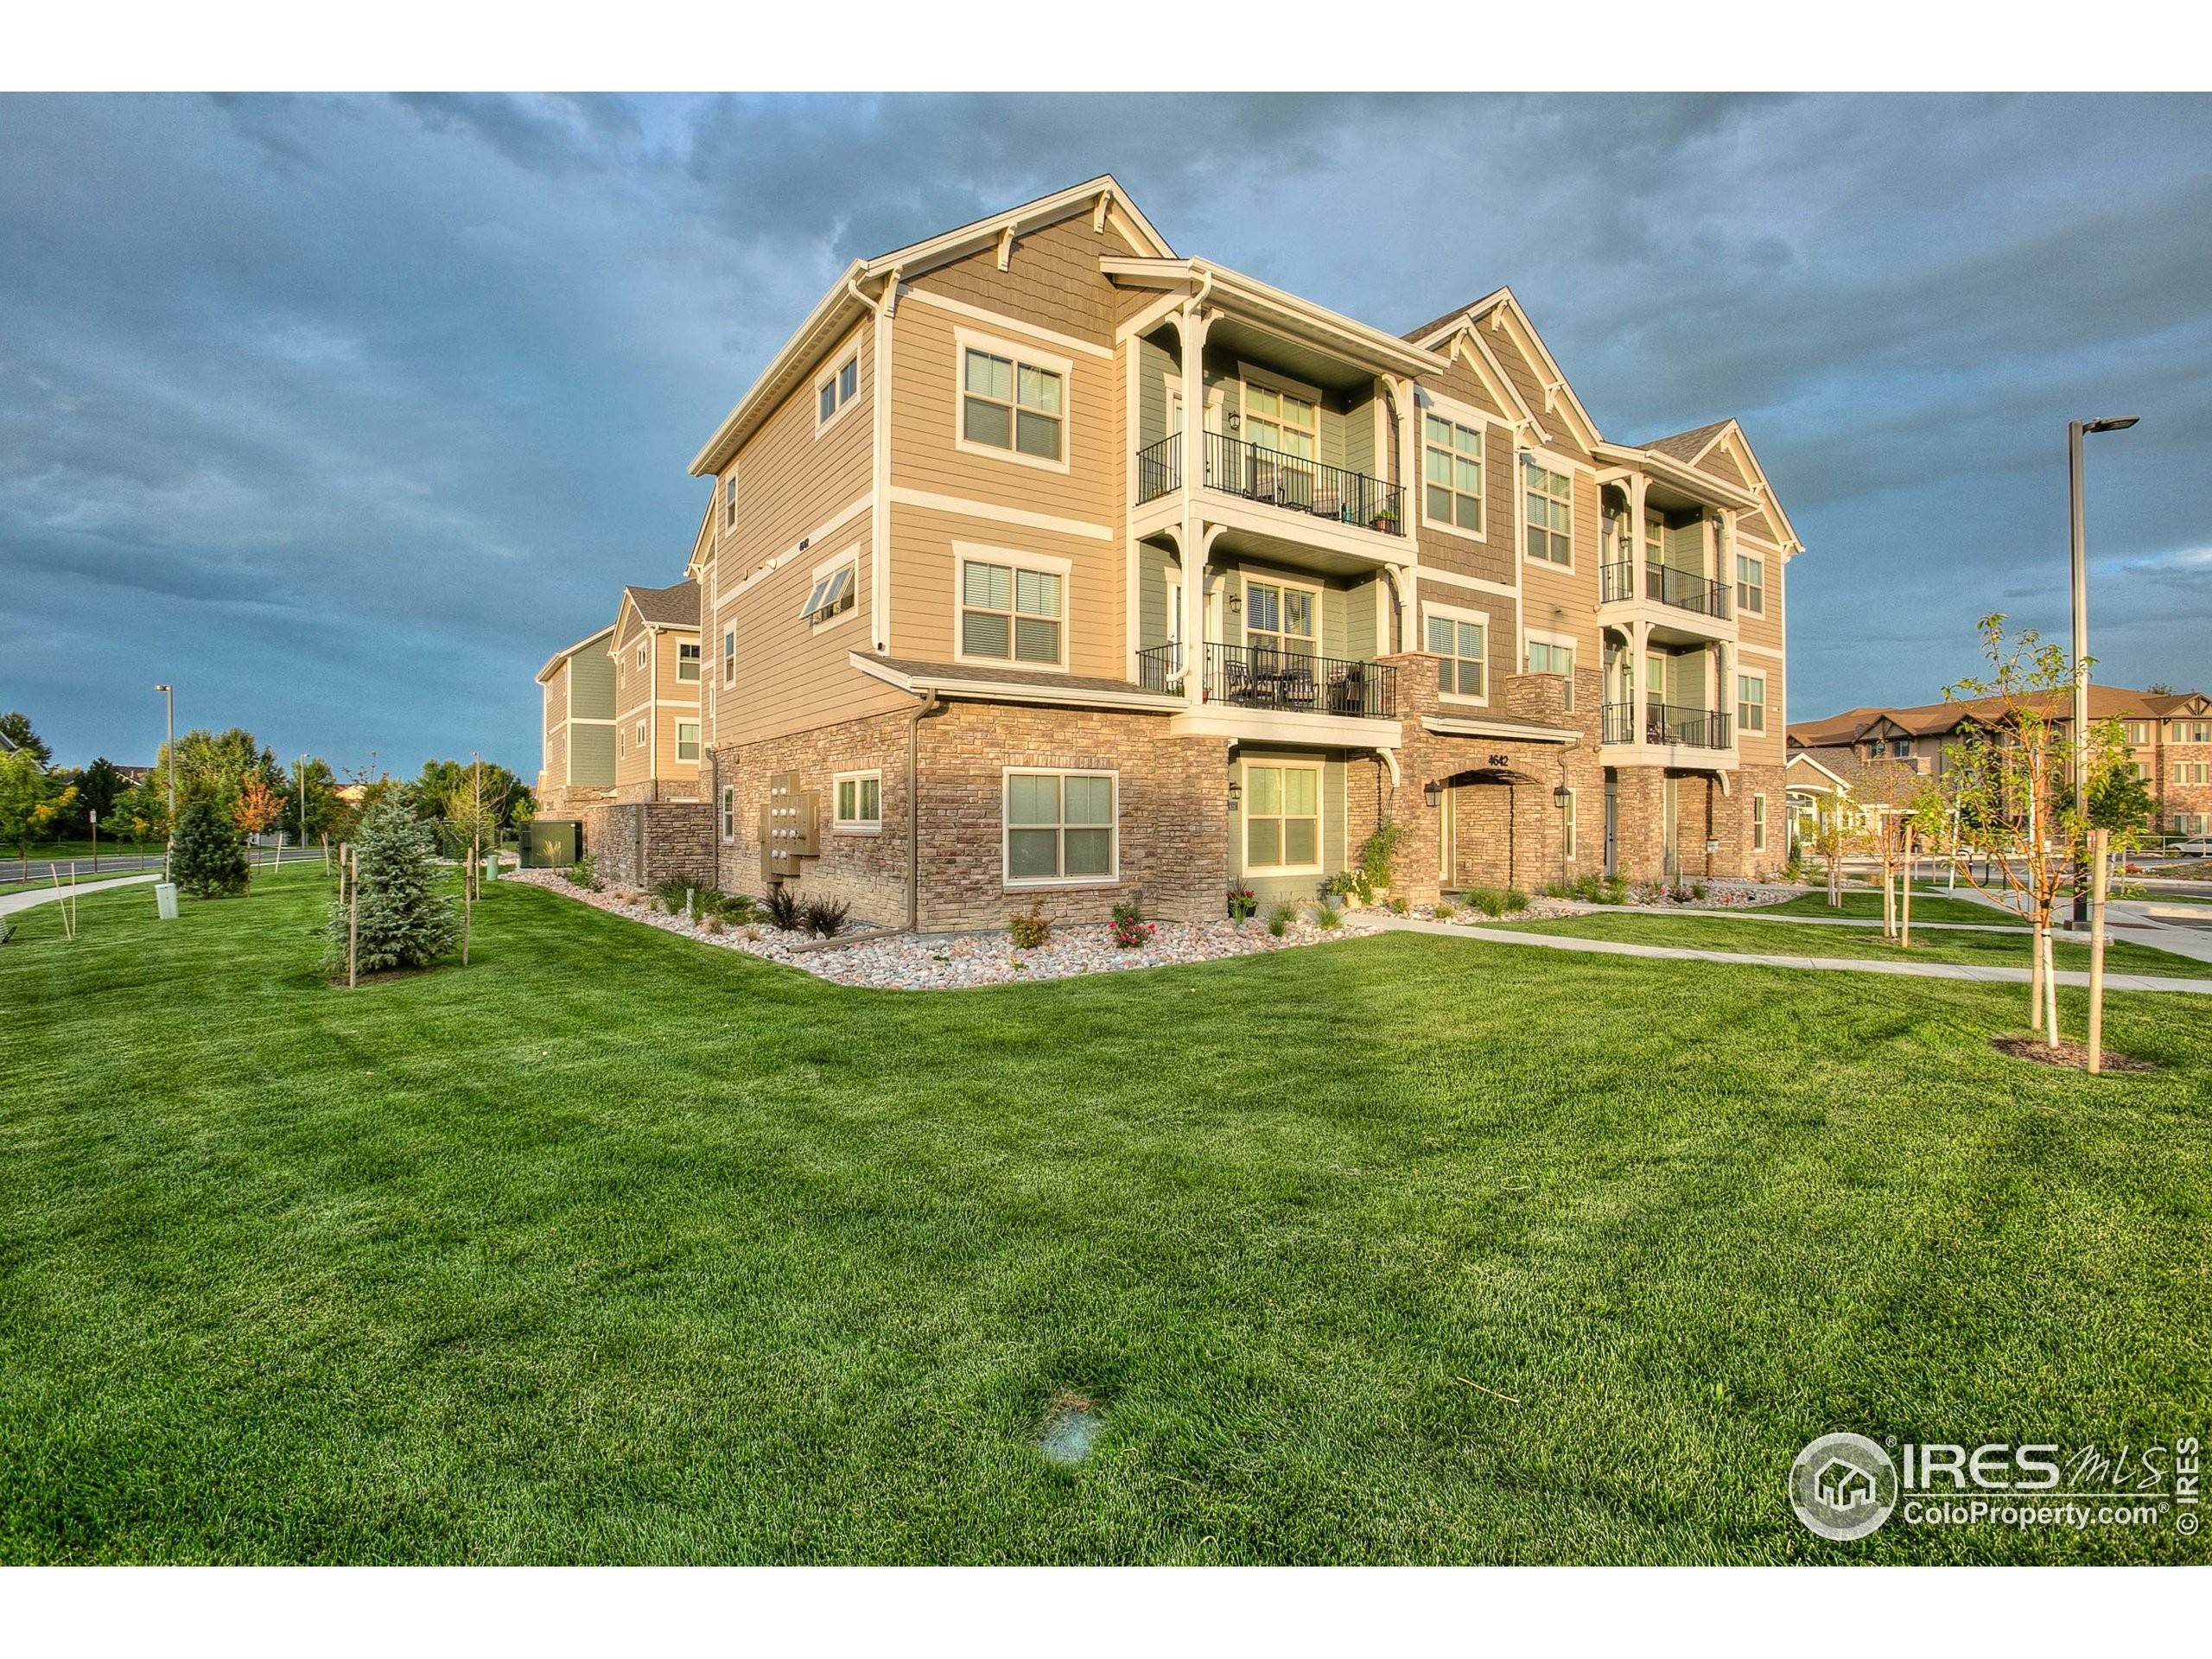 2. Single Family Homes for Active at 4622 Hahns Peak Drive 308 Loveland, Colorado 80538 United States